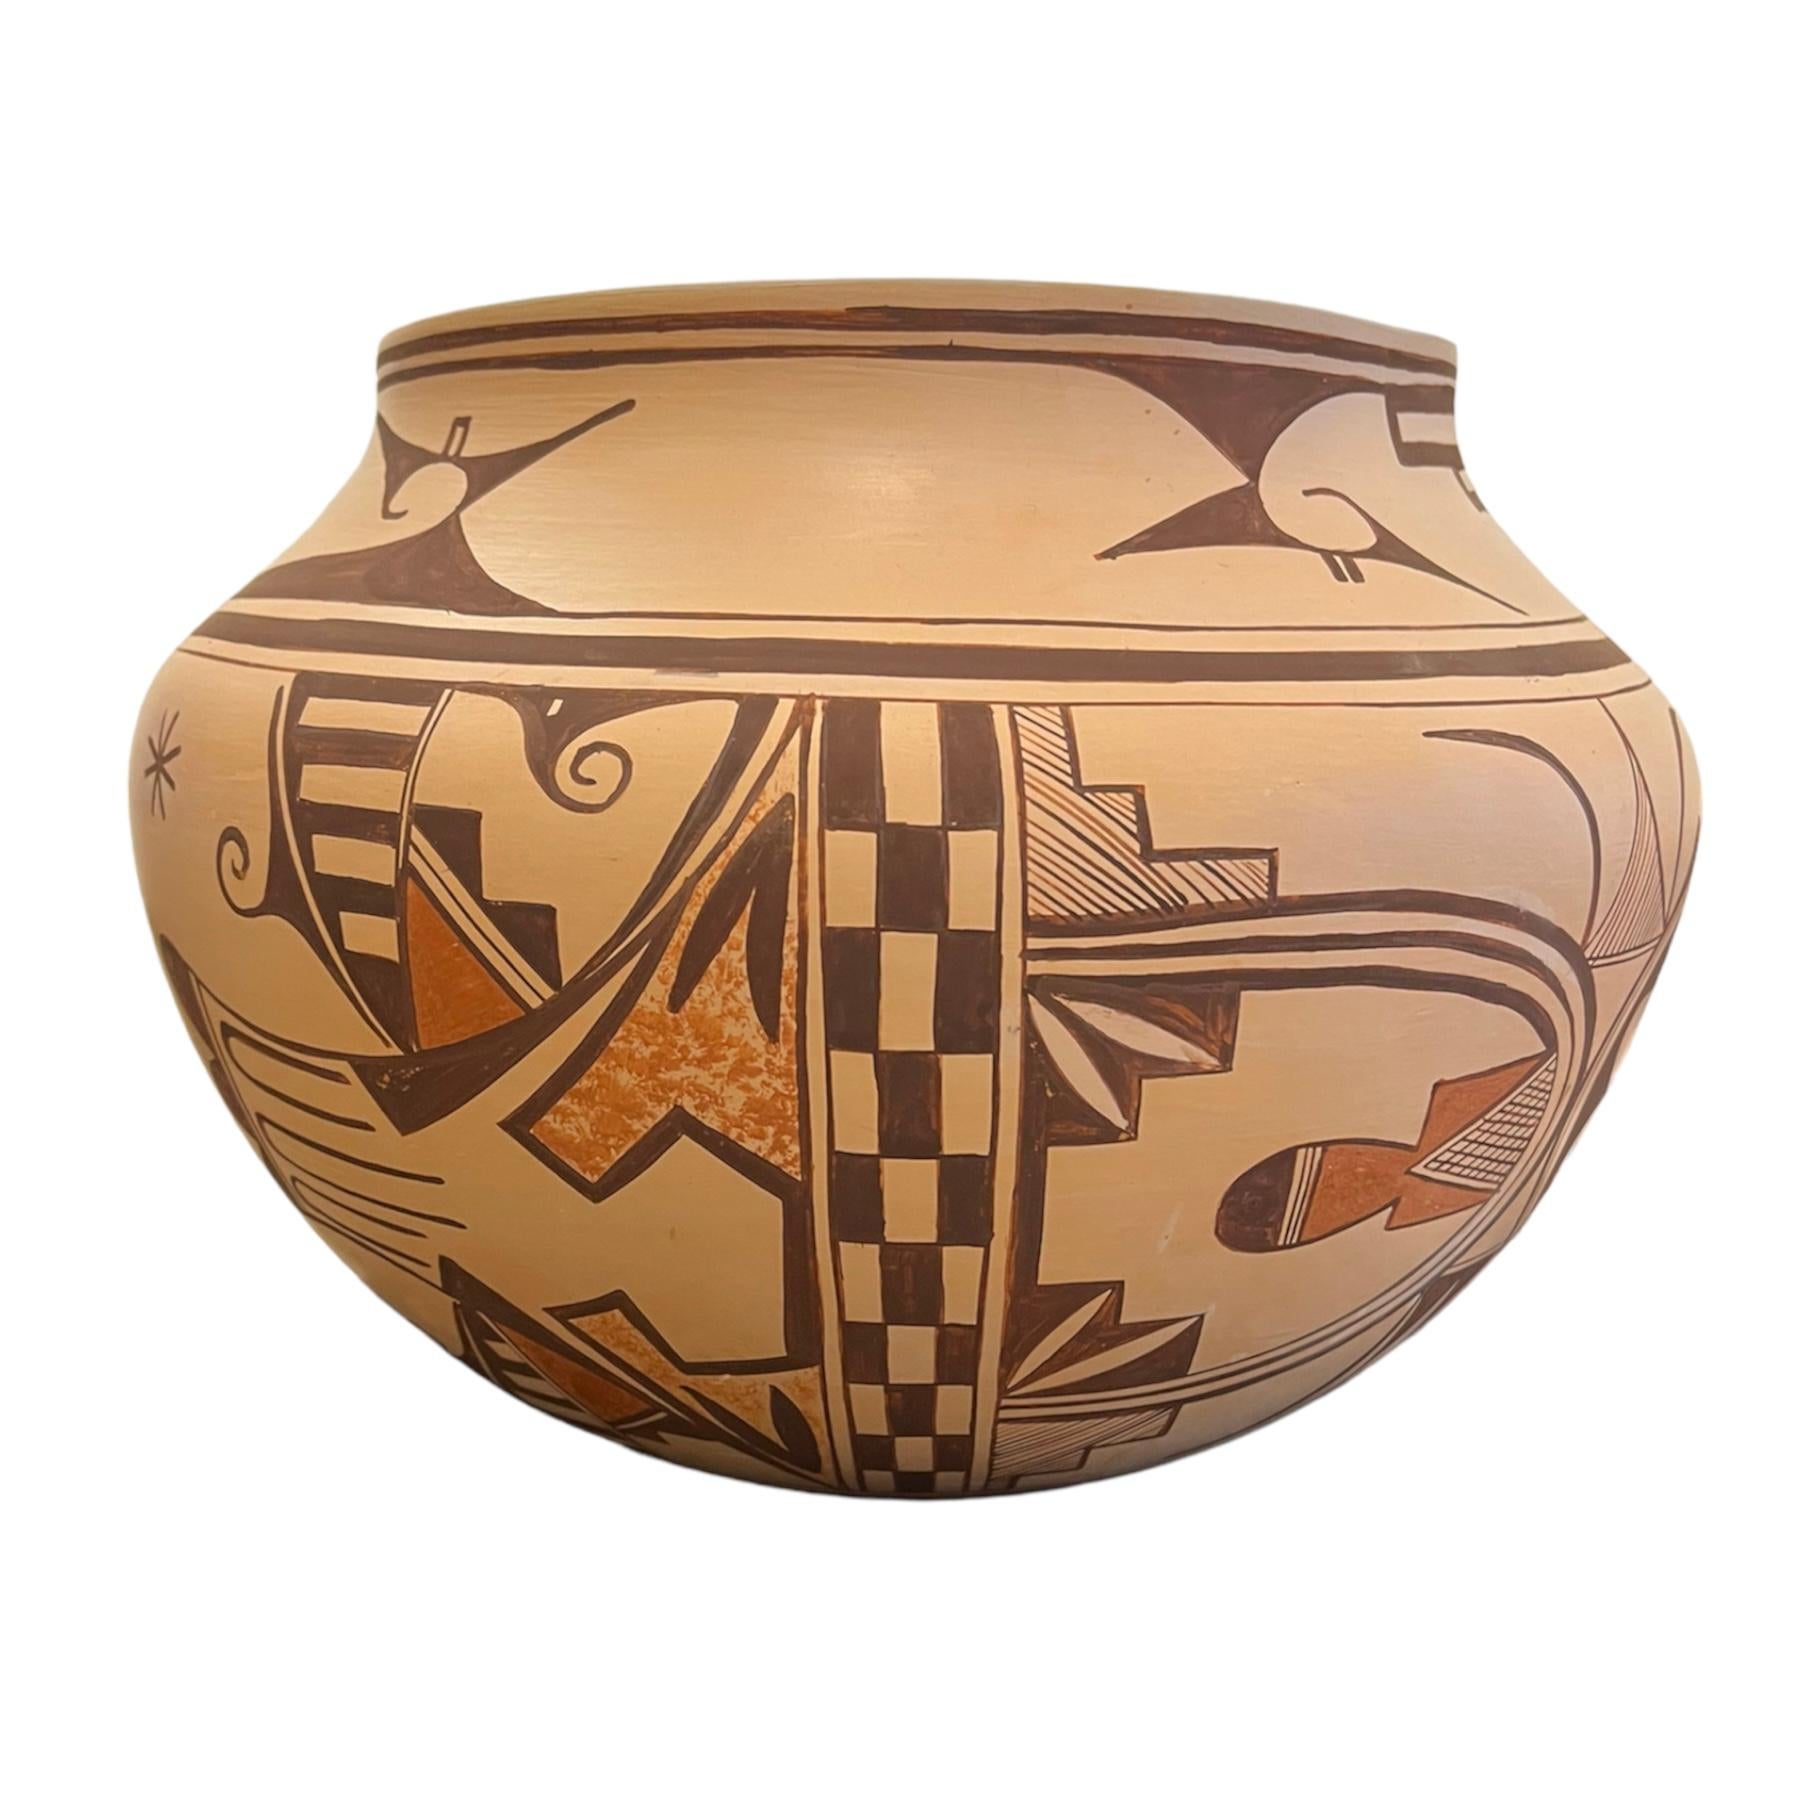 2023
Coil built vessel, Hopi slip with tansy mustard and hematite glaze, electric kiln fired.

11”x 15” x 15”
Born in Santa Fe, New Mexico, Jacob Thomas Frye is a fourth-generation potter and painter from Tesuque Pueblo. Frye’s passion for art and